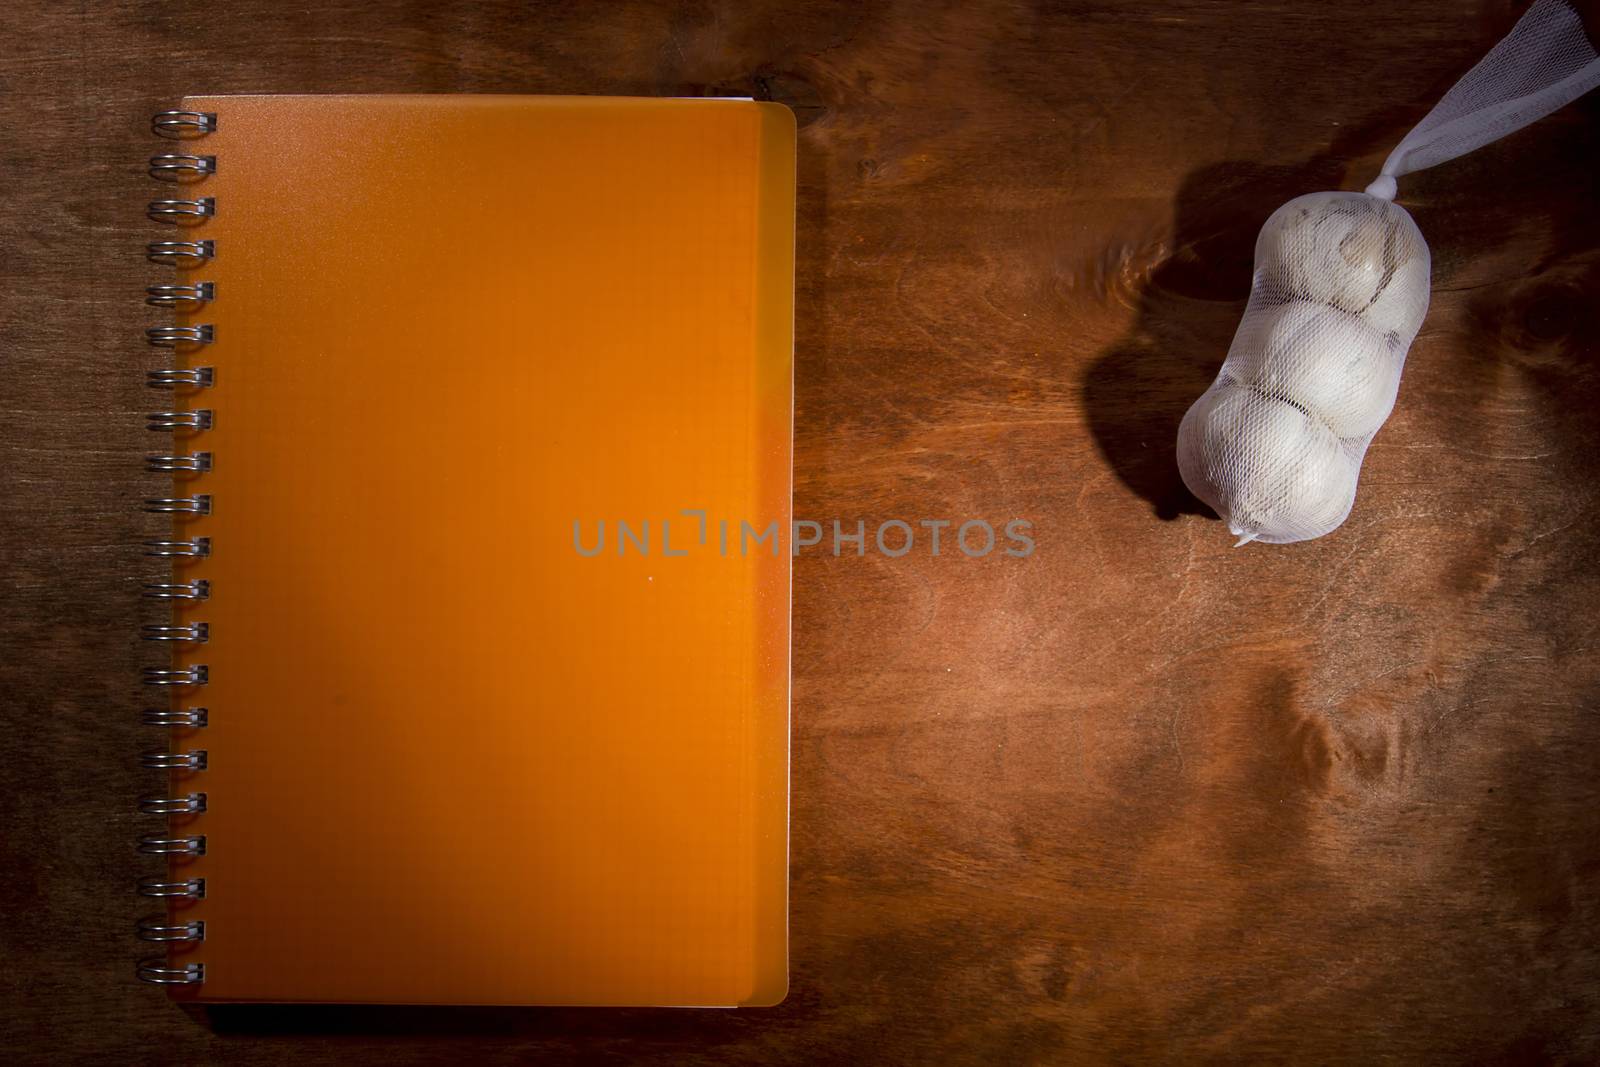 Garlic heads and orange notebook on a wooden table